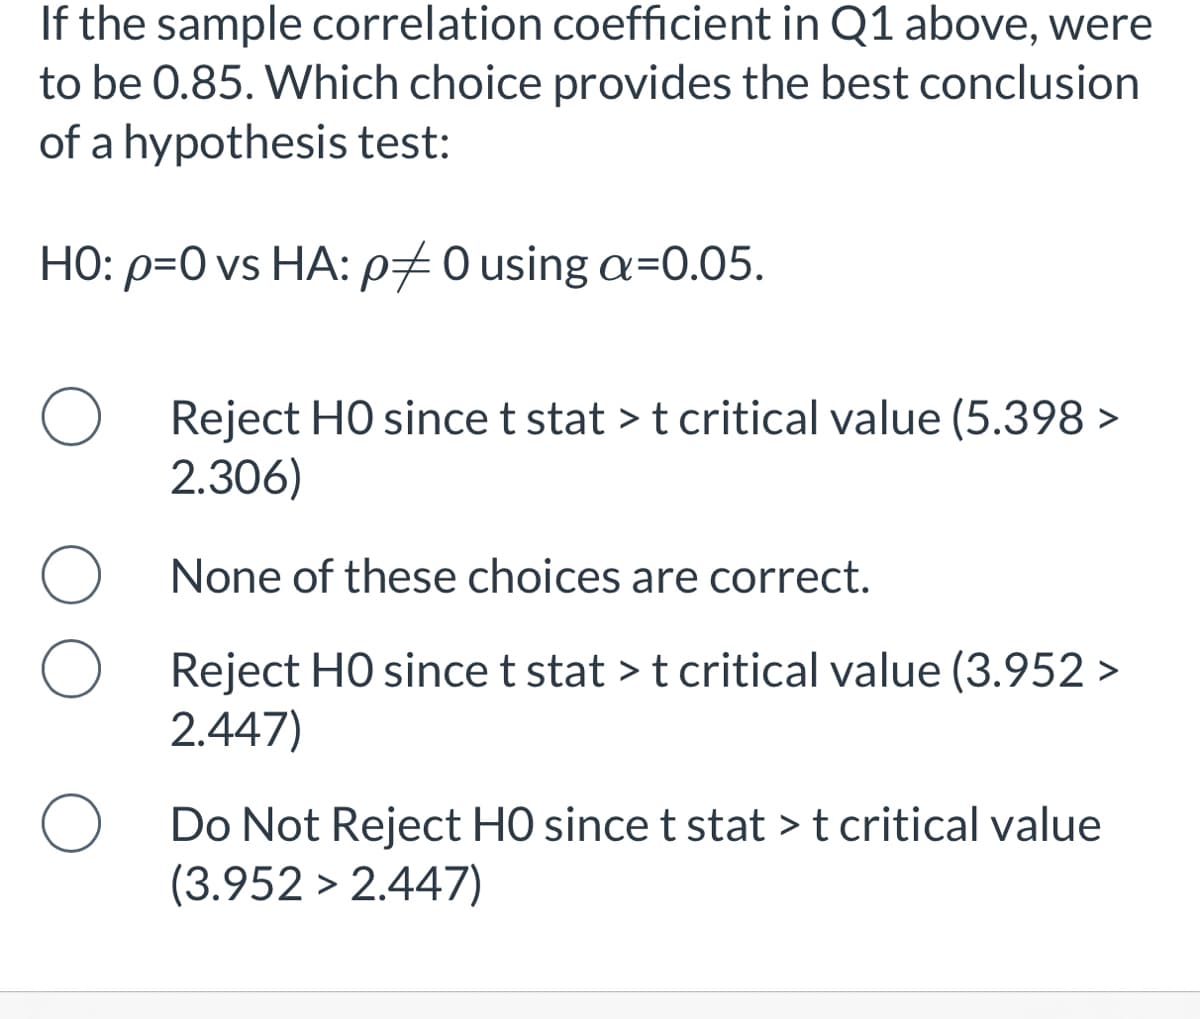 If the sample correlation coefficient in Q1 above, were
to be 0.85. Which choice provides the best conclusion
of a hypothesis test:
HO: p=0 vs HA: p70 using a=0.05.
Reject HO since t stat > t critical value (5.398 >
2.306)
None of these choices are correct.
Reject HO since t stat > t critical value (3.952 >
2.447)
Do Not Reject H0 since t stat > t critical value
(3.952 > 2.447)
